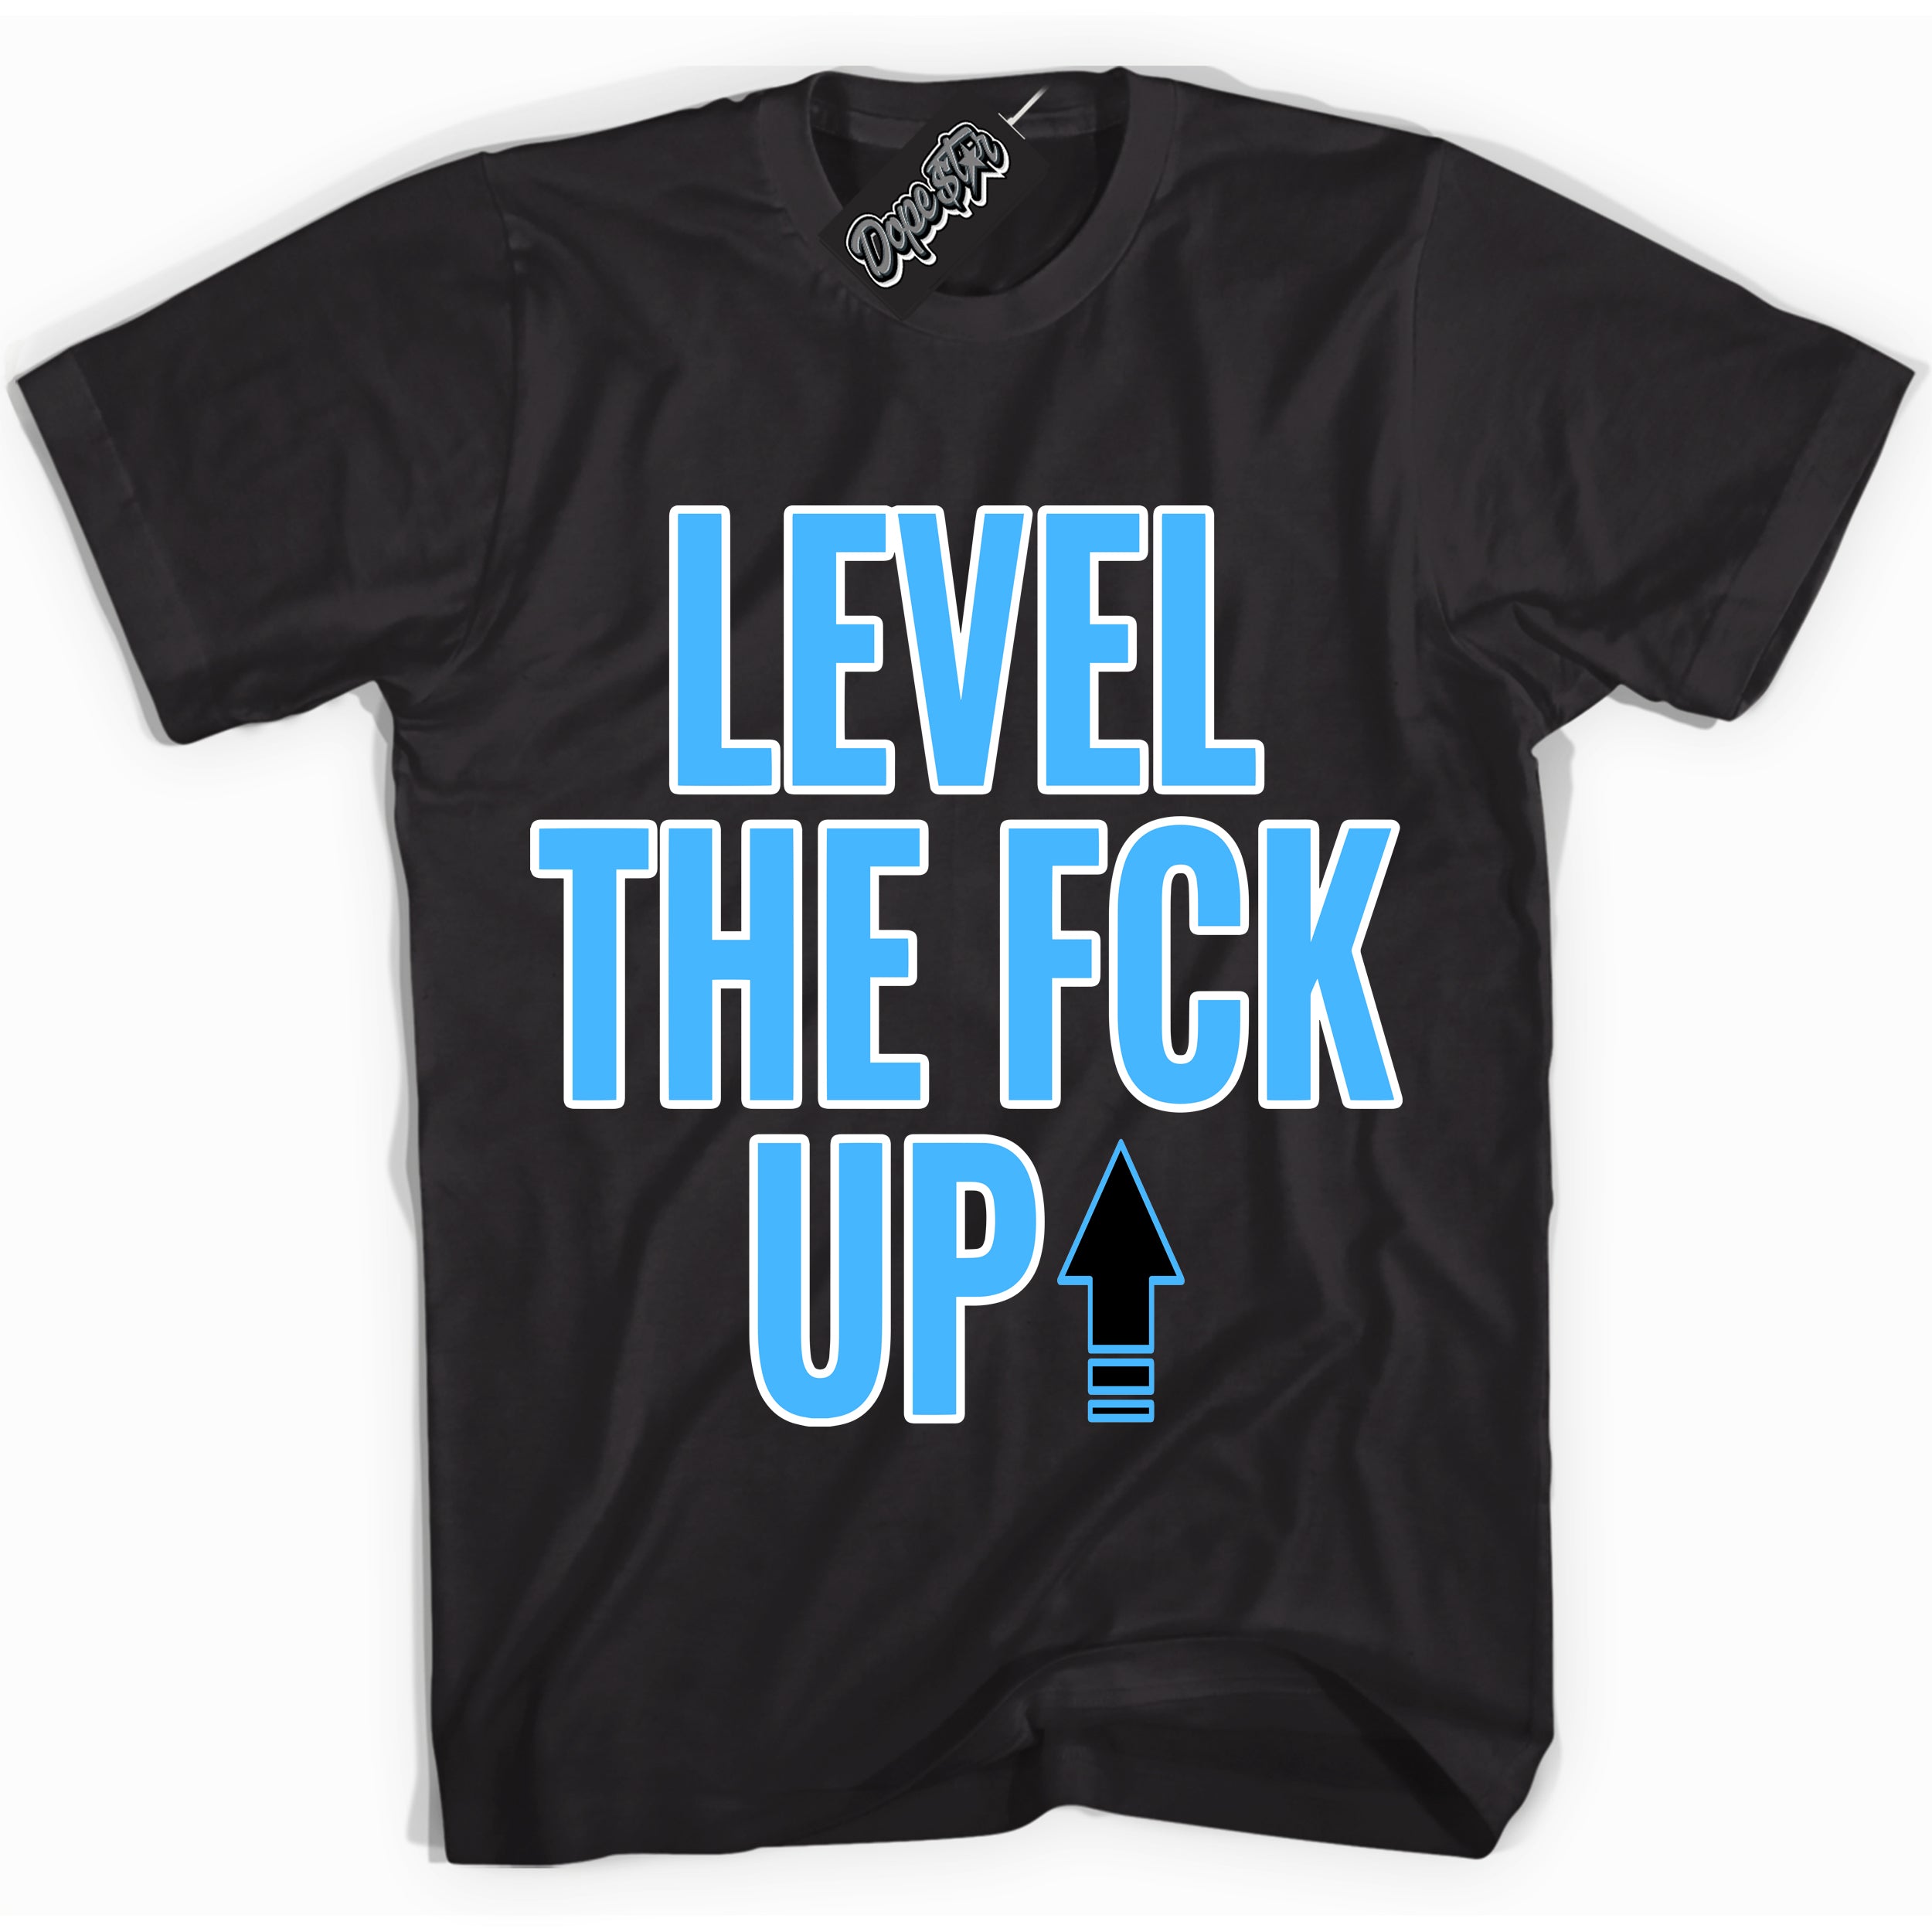 Cool Black graphic tee with “ Level The Fck Up ” design, that perfectly matches Powder Blue 9s sneakers 